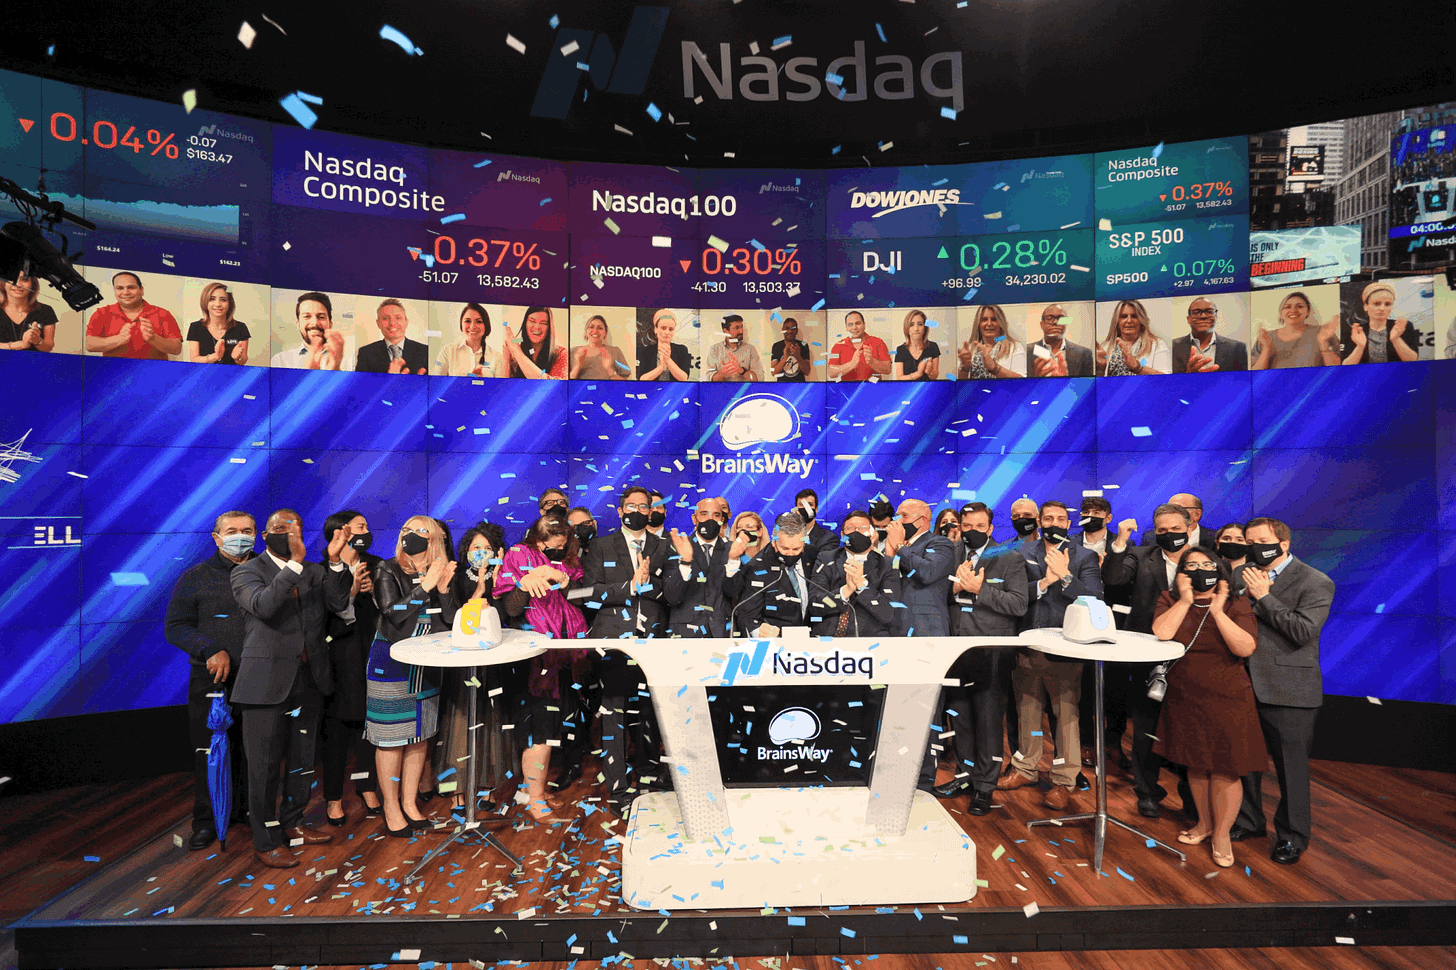 Ringing the closing bell!